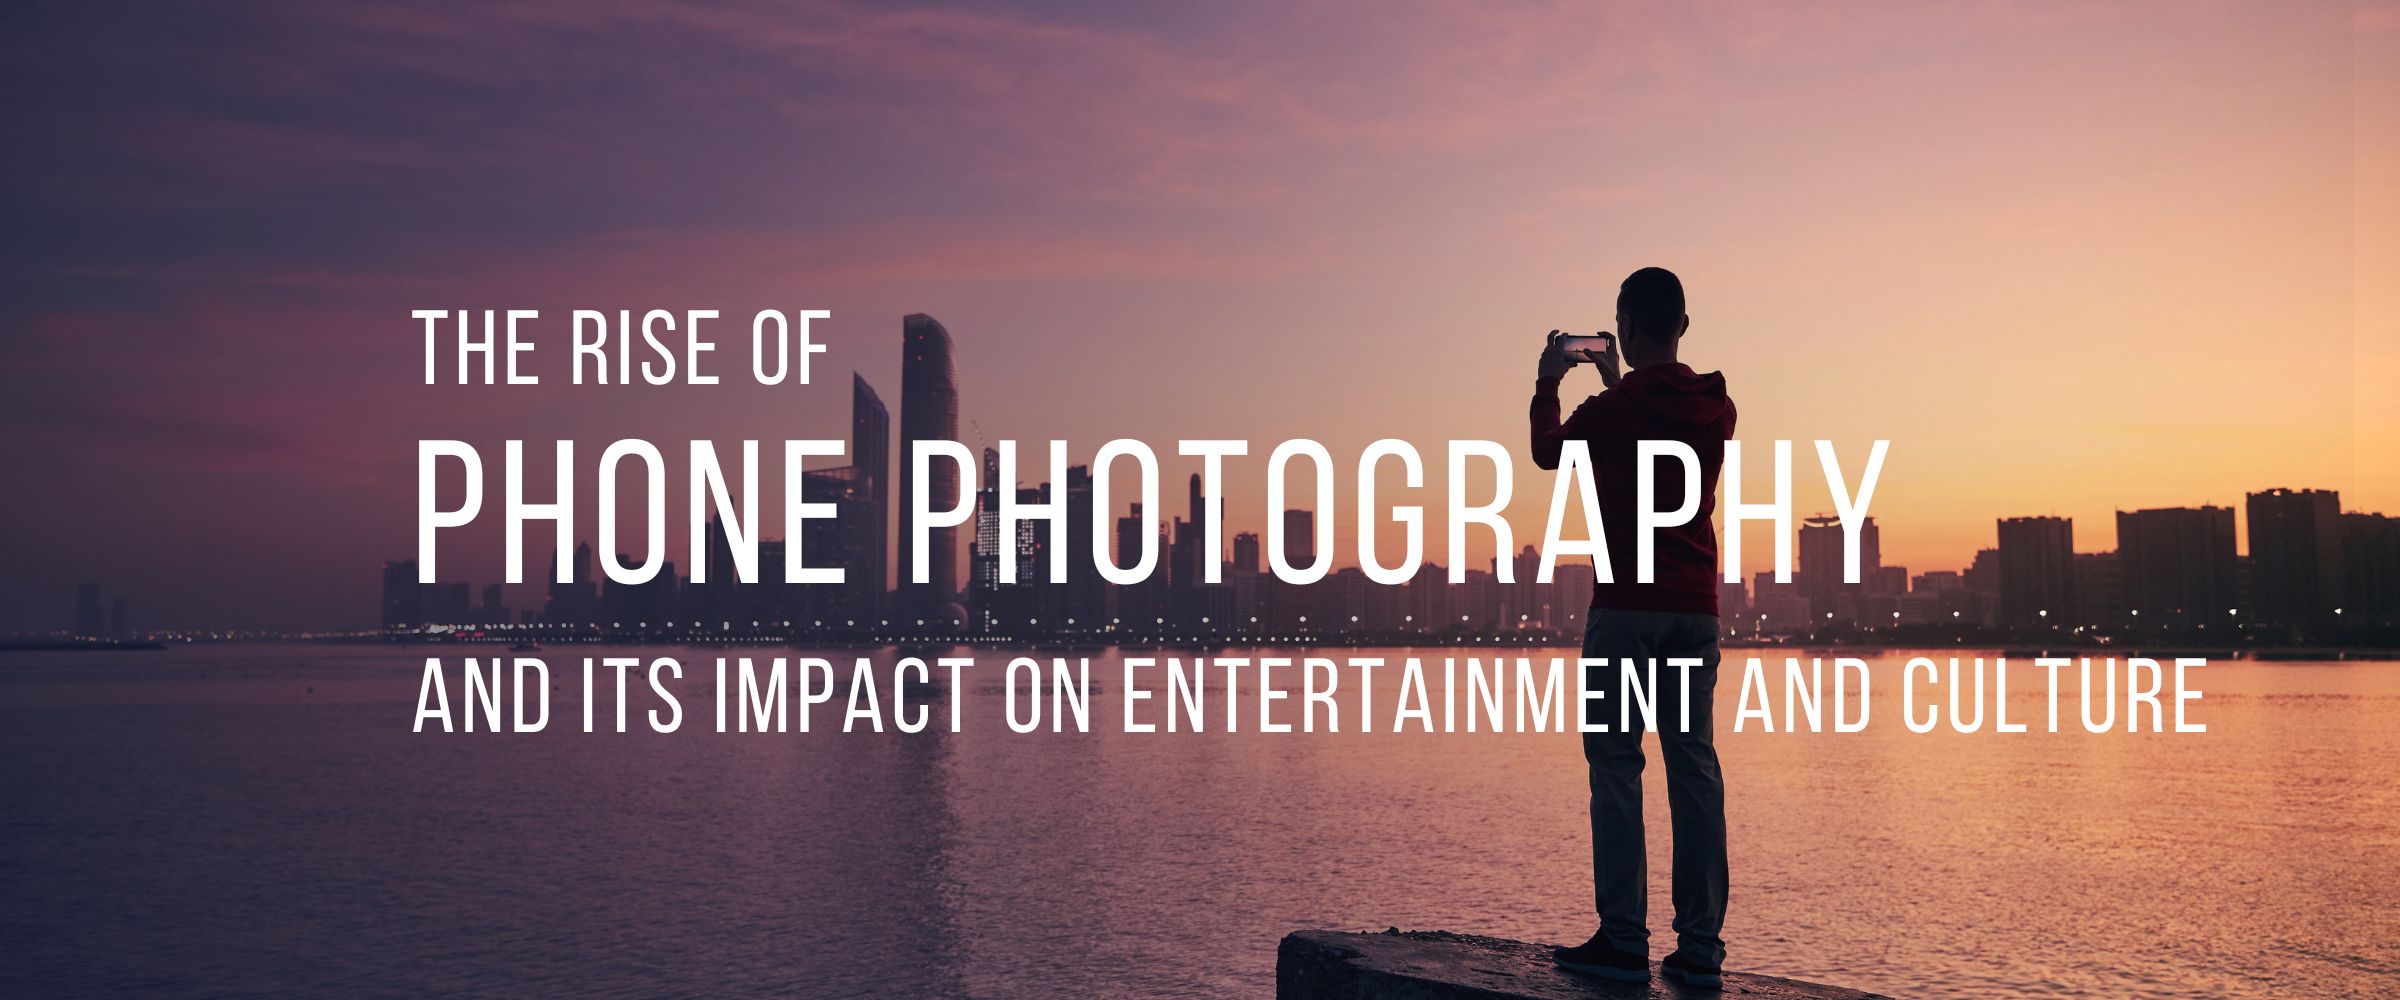 The Rise of Phone Photography and Its Impact on Entertainment Culture